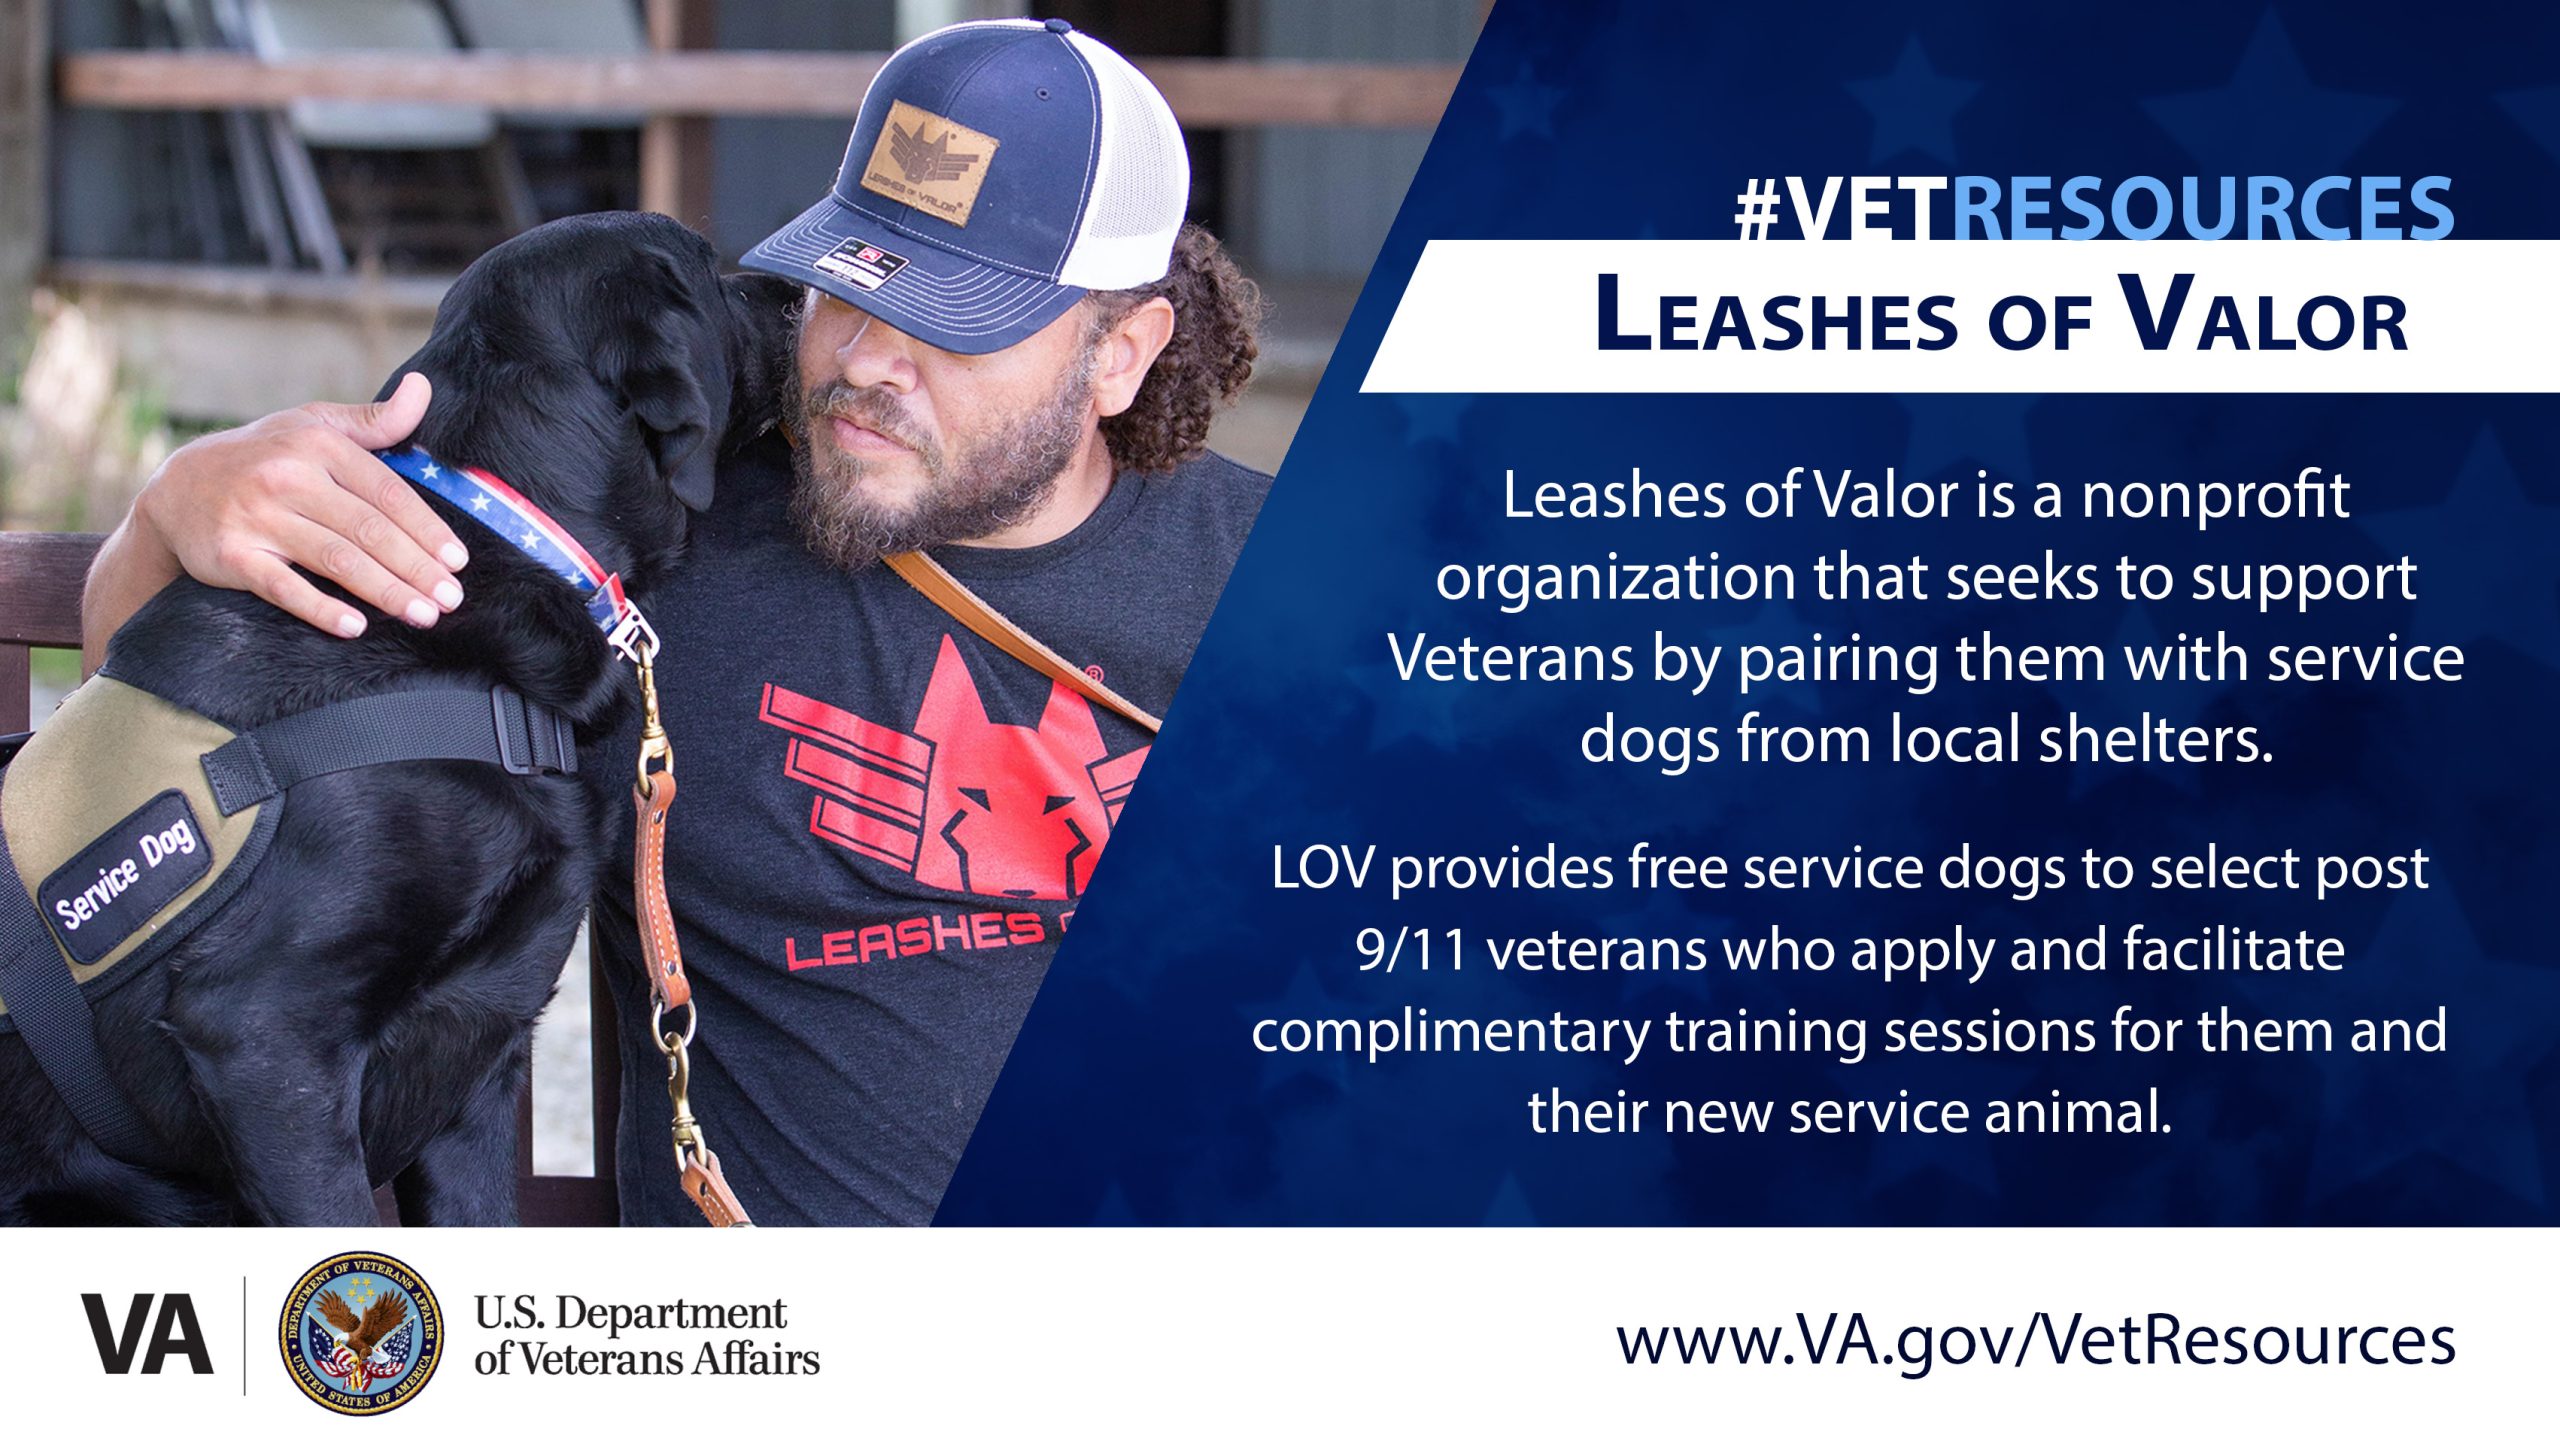 #VetResources graphic for Leashes of Valor. Image shows a Veteran wearing a Leashes of Valor t-shirt, while hugging a service dog. Text reads: Leashes of Valor is a nonprofit organization that seeks to support Veterans by pairing them with service dogs from local shelters. LOV provides free service dogs to select post 9/11 veterans who apply and facilitate complimentary training sessions for them and their new service animal.